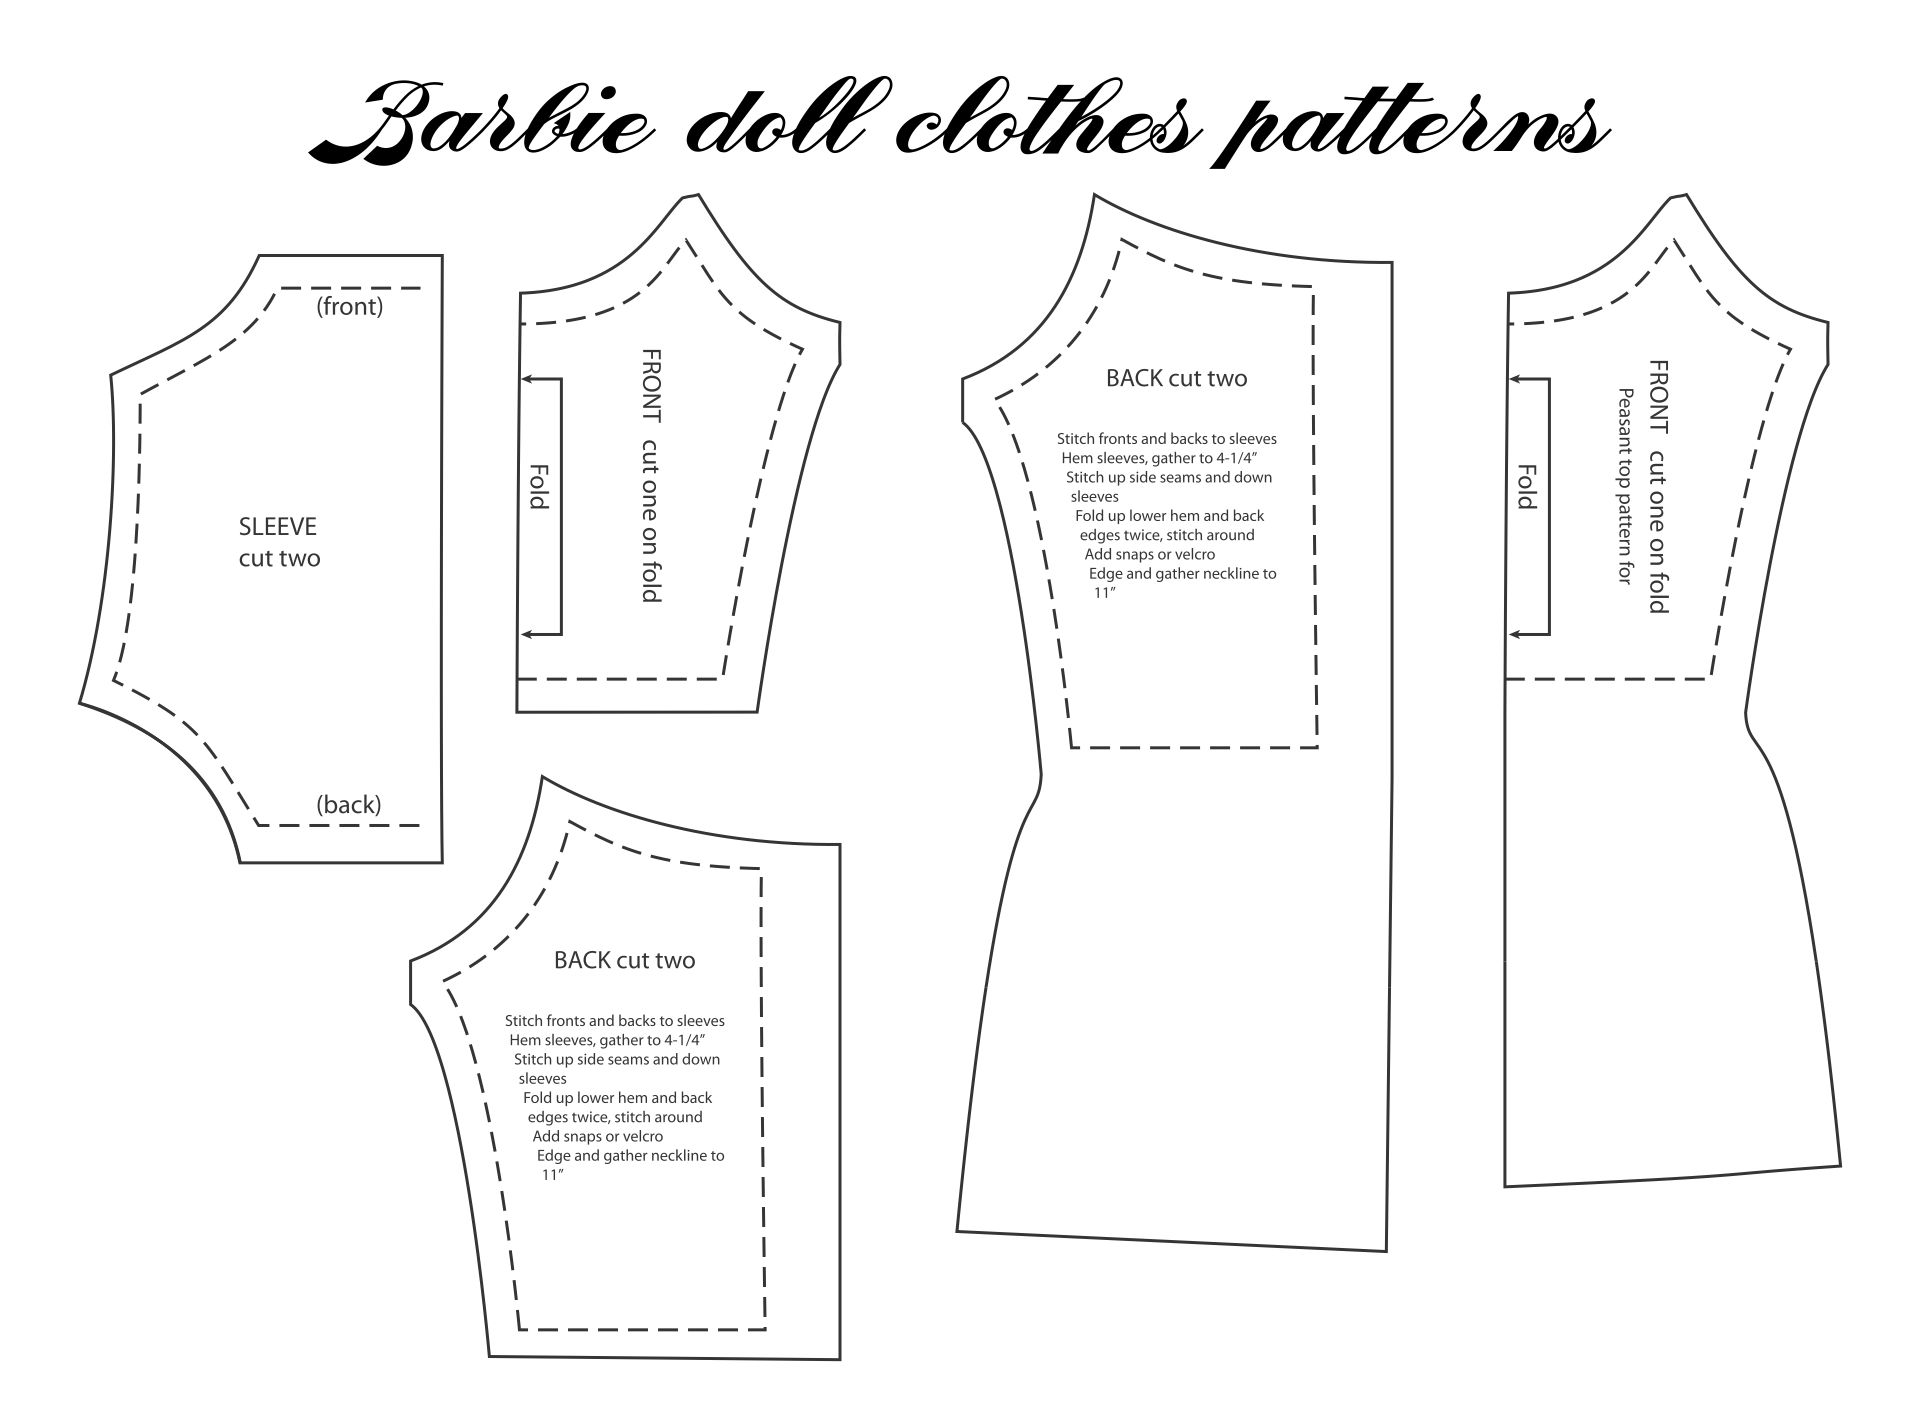 How To Draft Patterns For DIY Barbie Clothes The Shapes Of Fabric ...